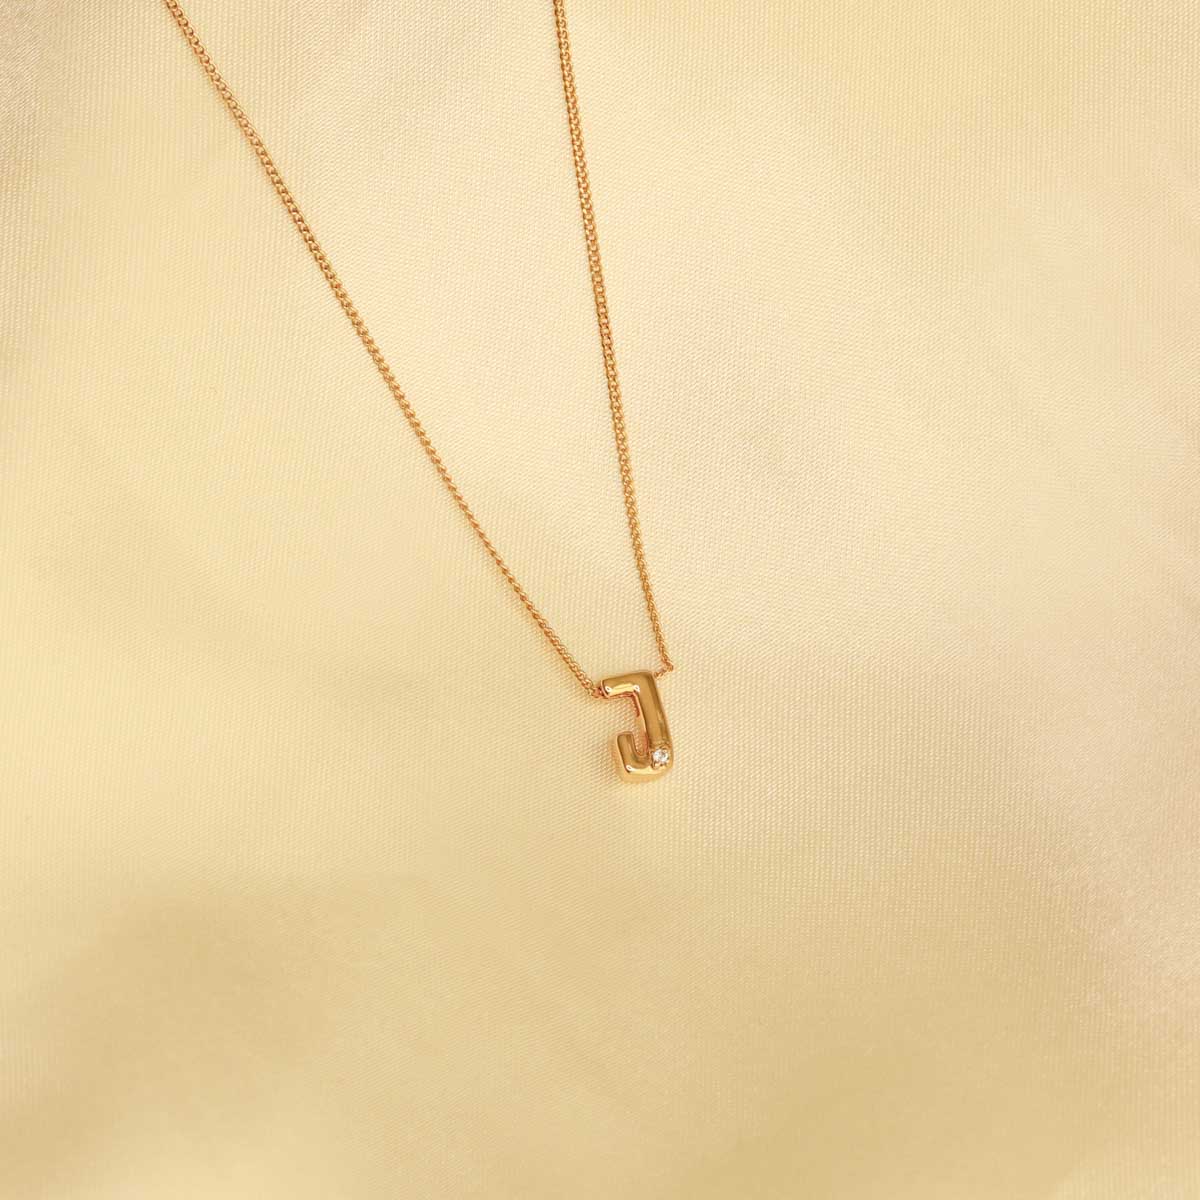 Flat lay shot of J Initial Pendant Necklace in Gold